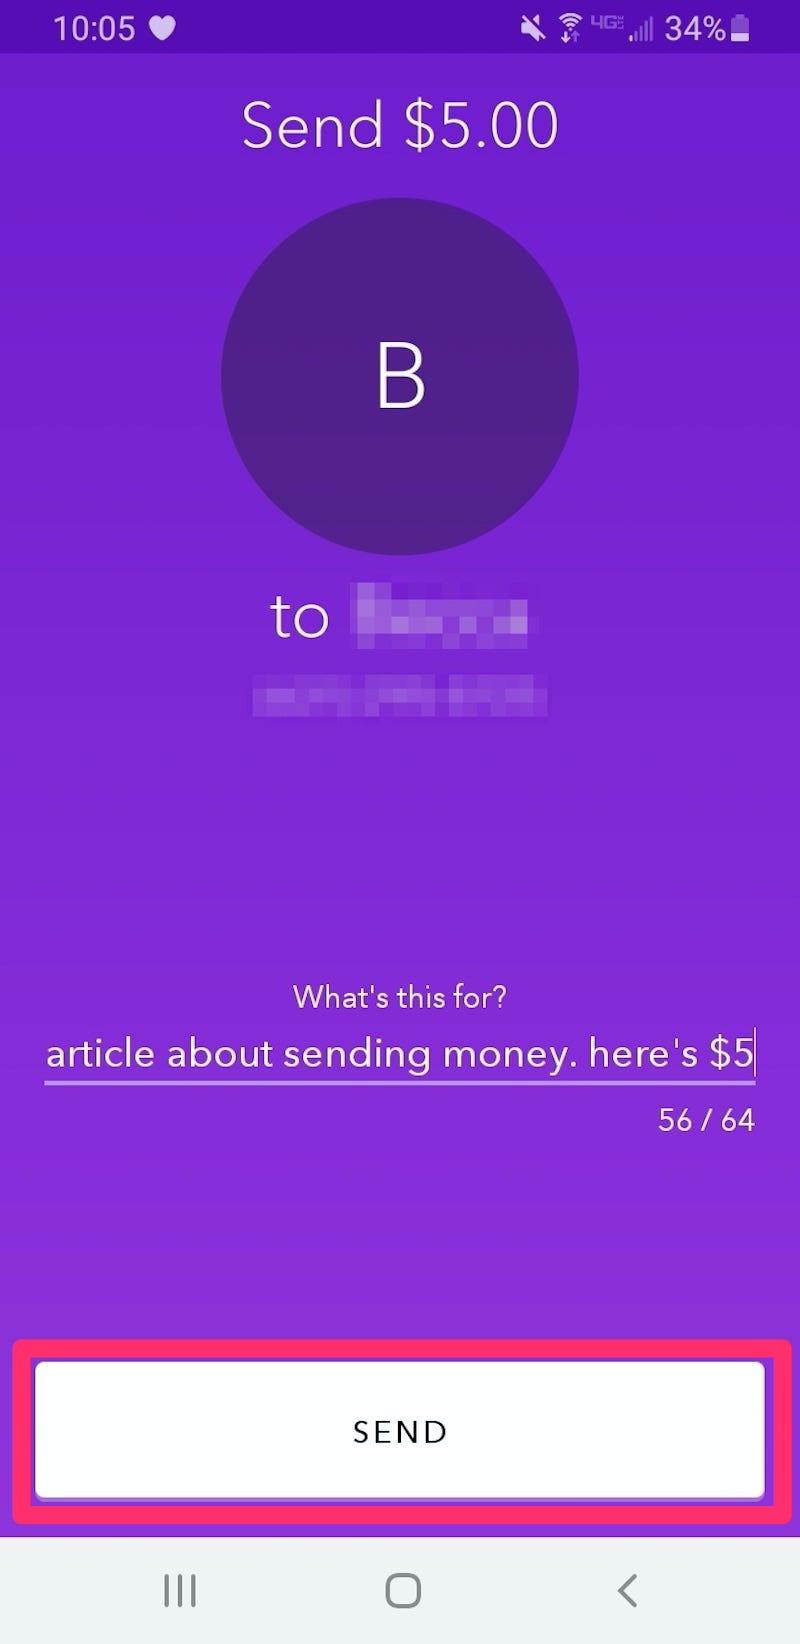 How To Send Money To Your Contacts With Zelle The Digital Payment App Business Insider India